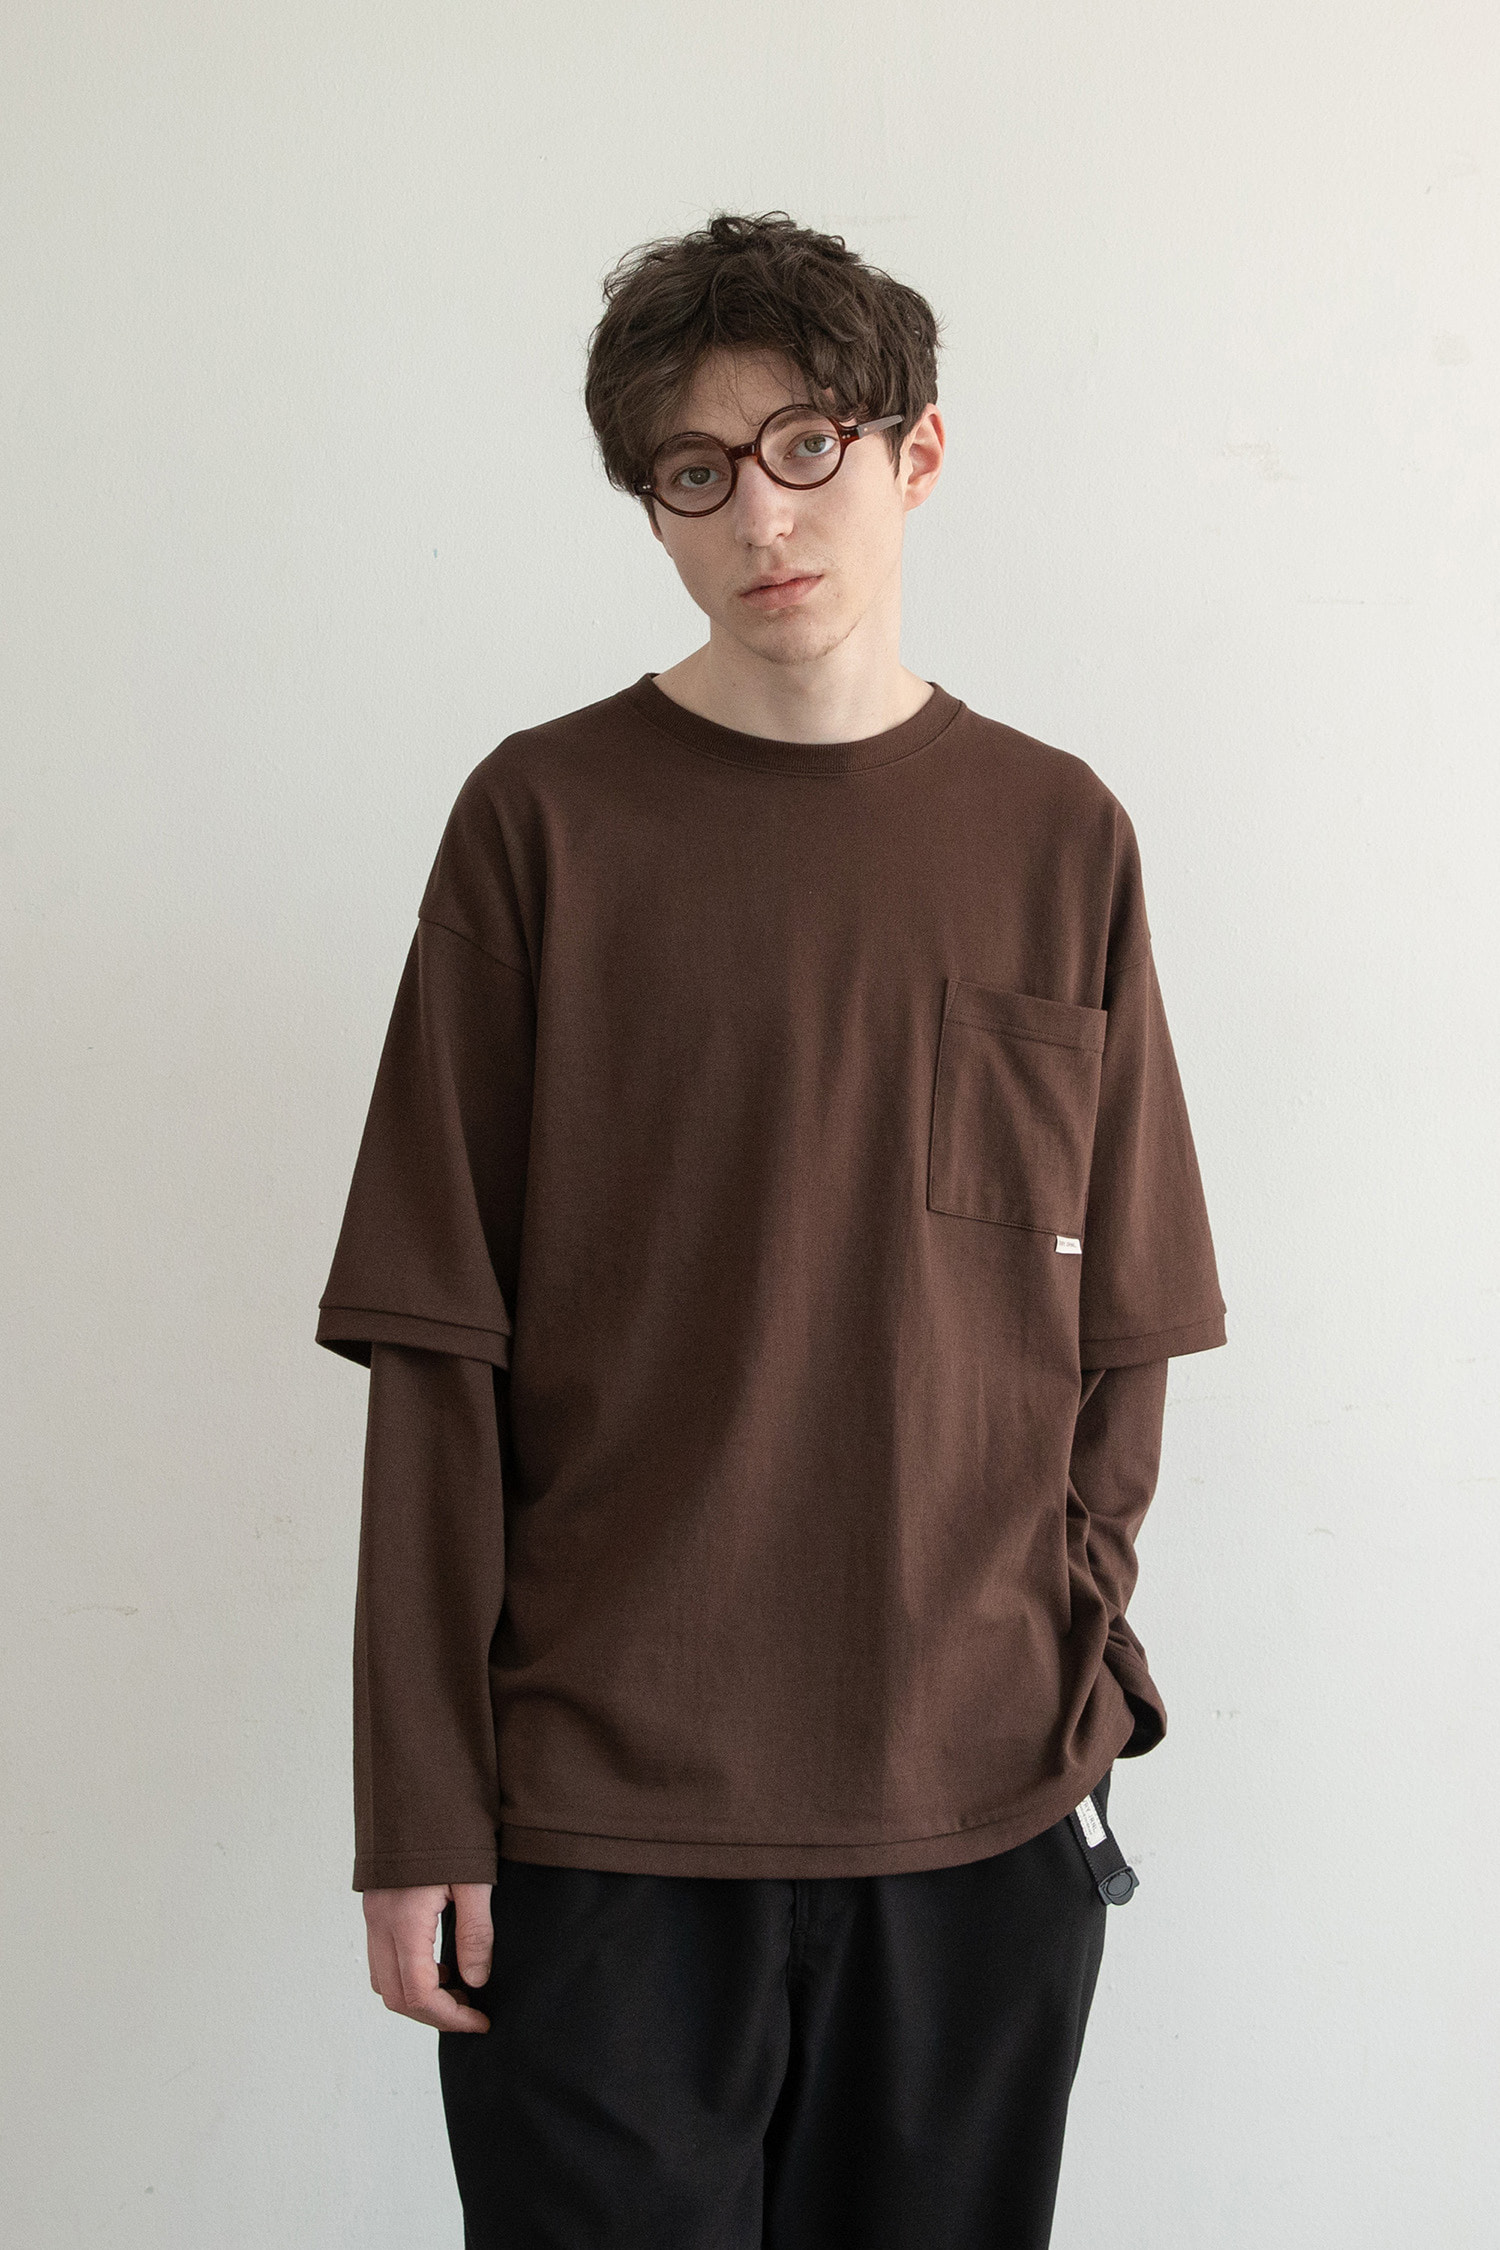 Sk8er Layered T (Brown)